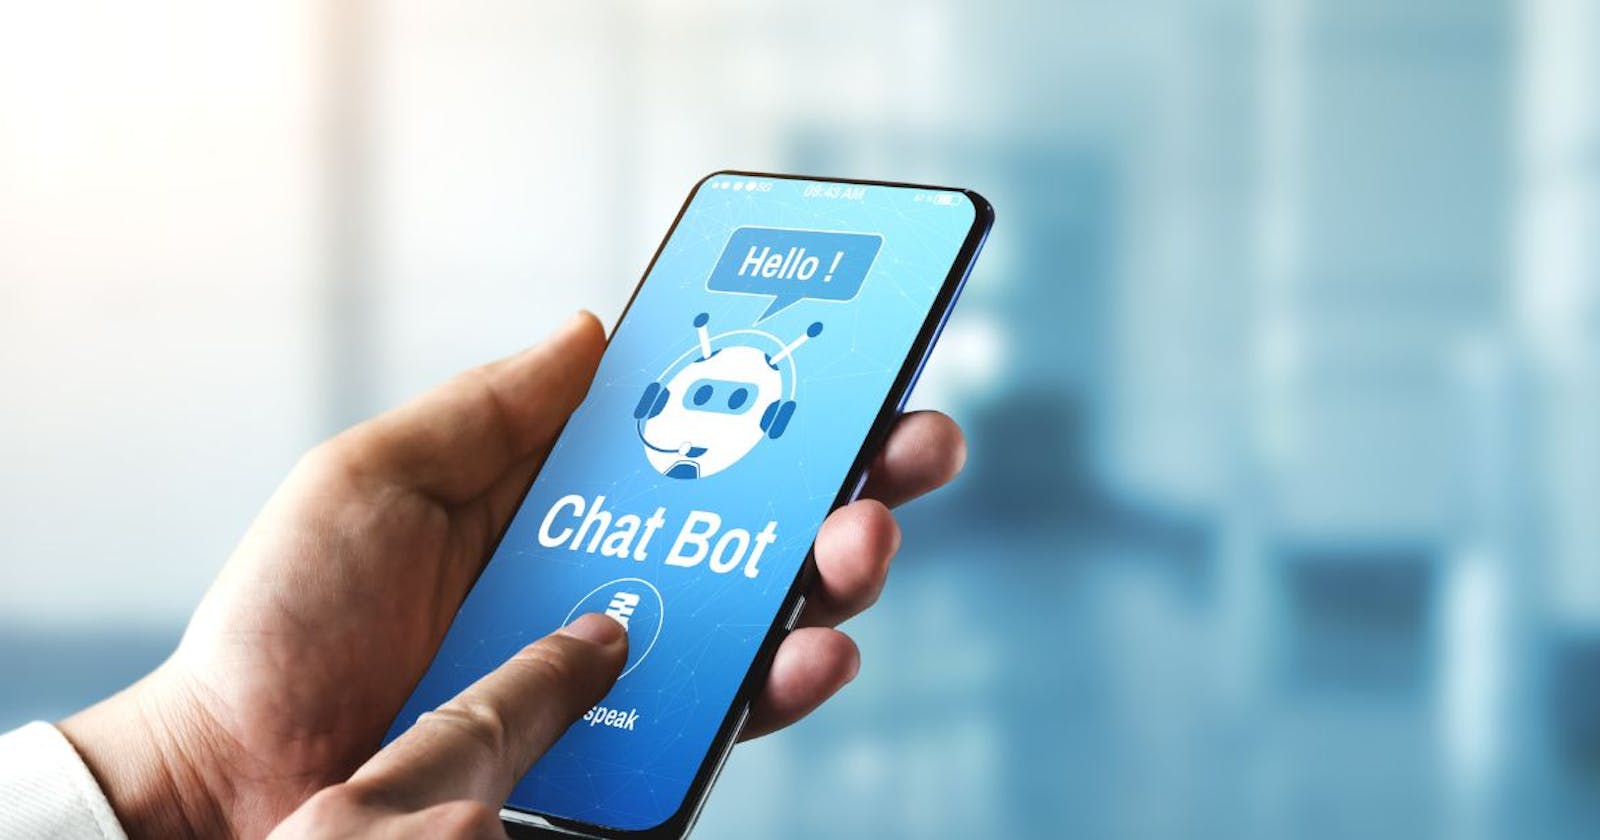 What are the Benefits of Using an AI Chatbot?